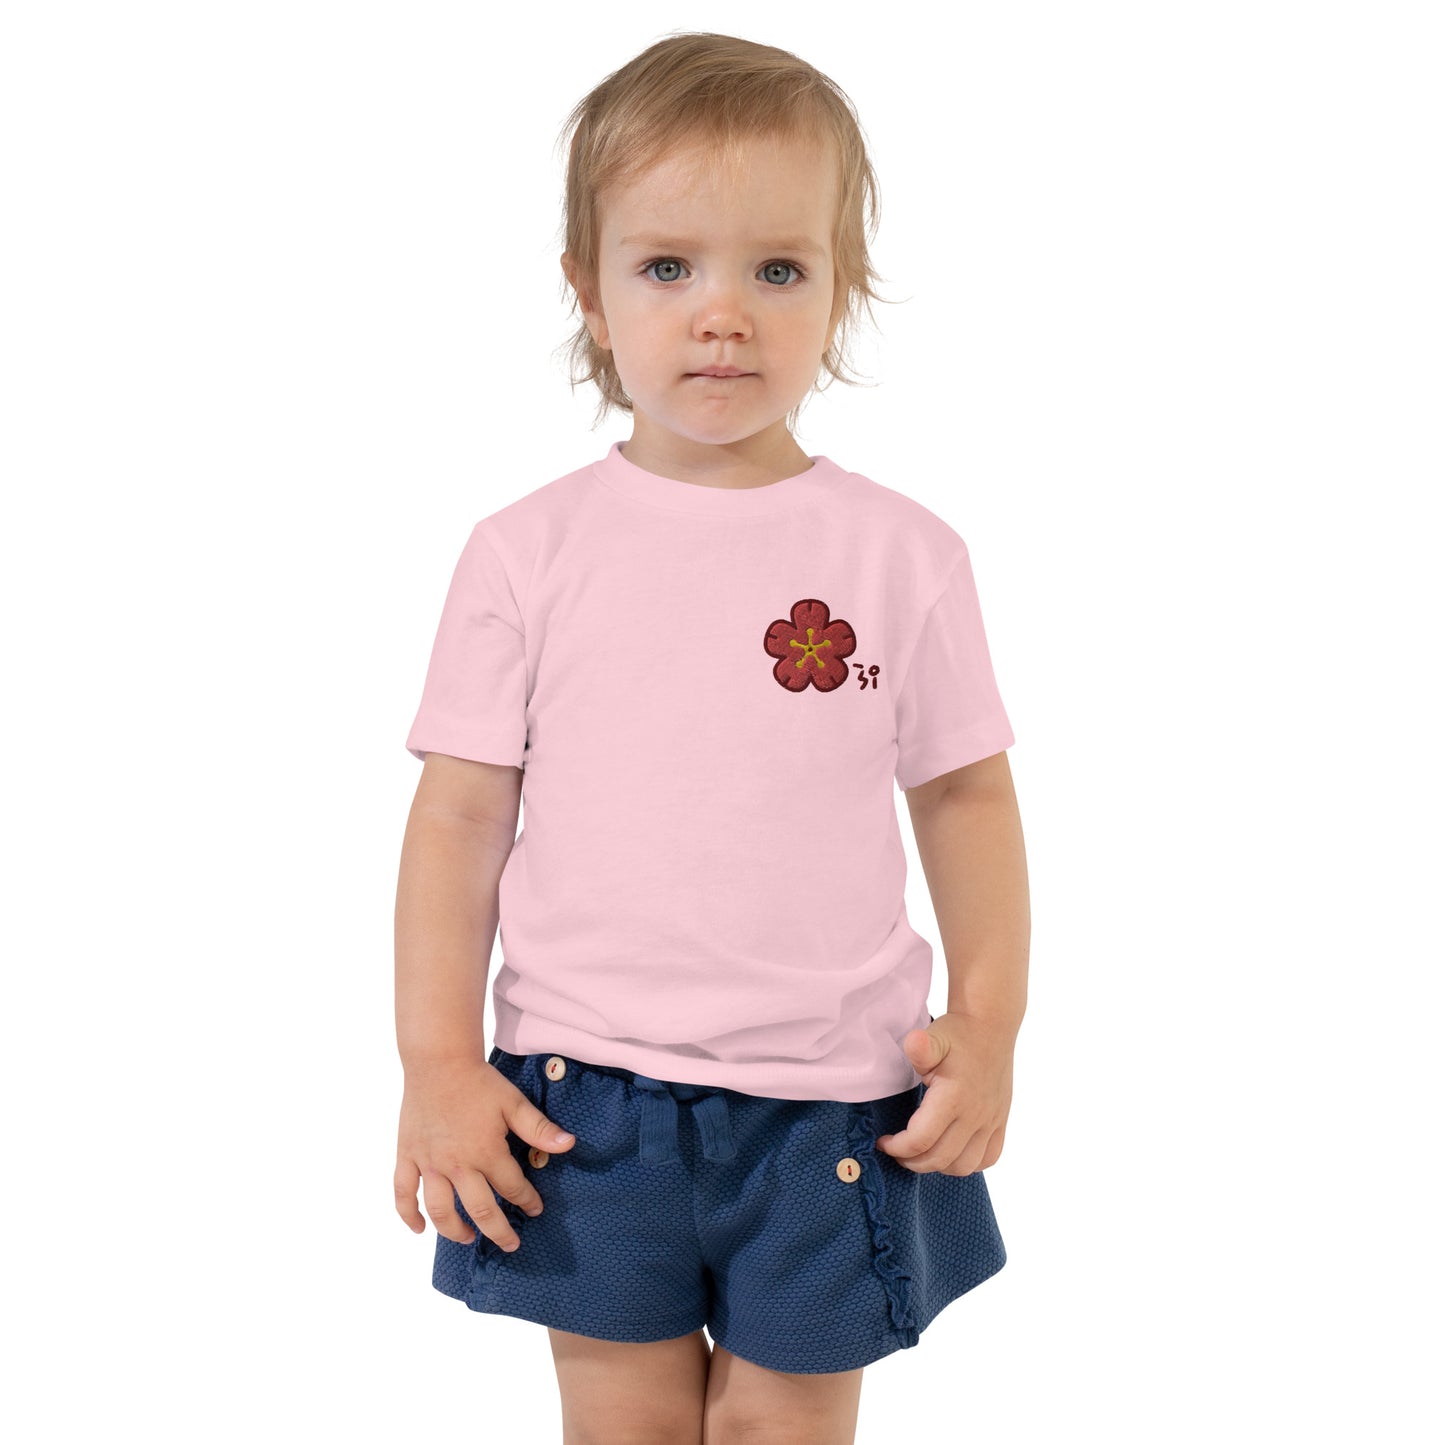 Chinese quince Toddler Short Sleeve Tee